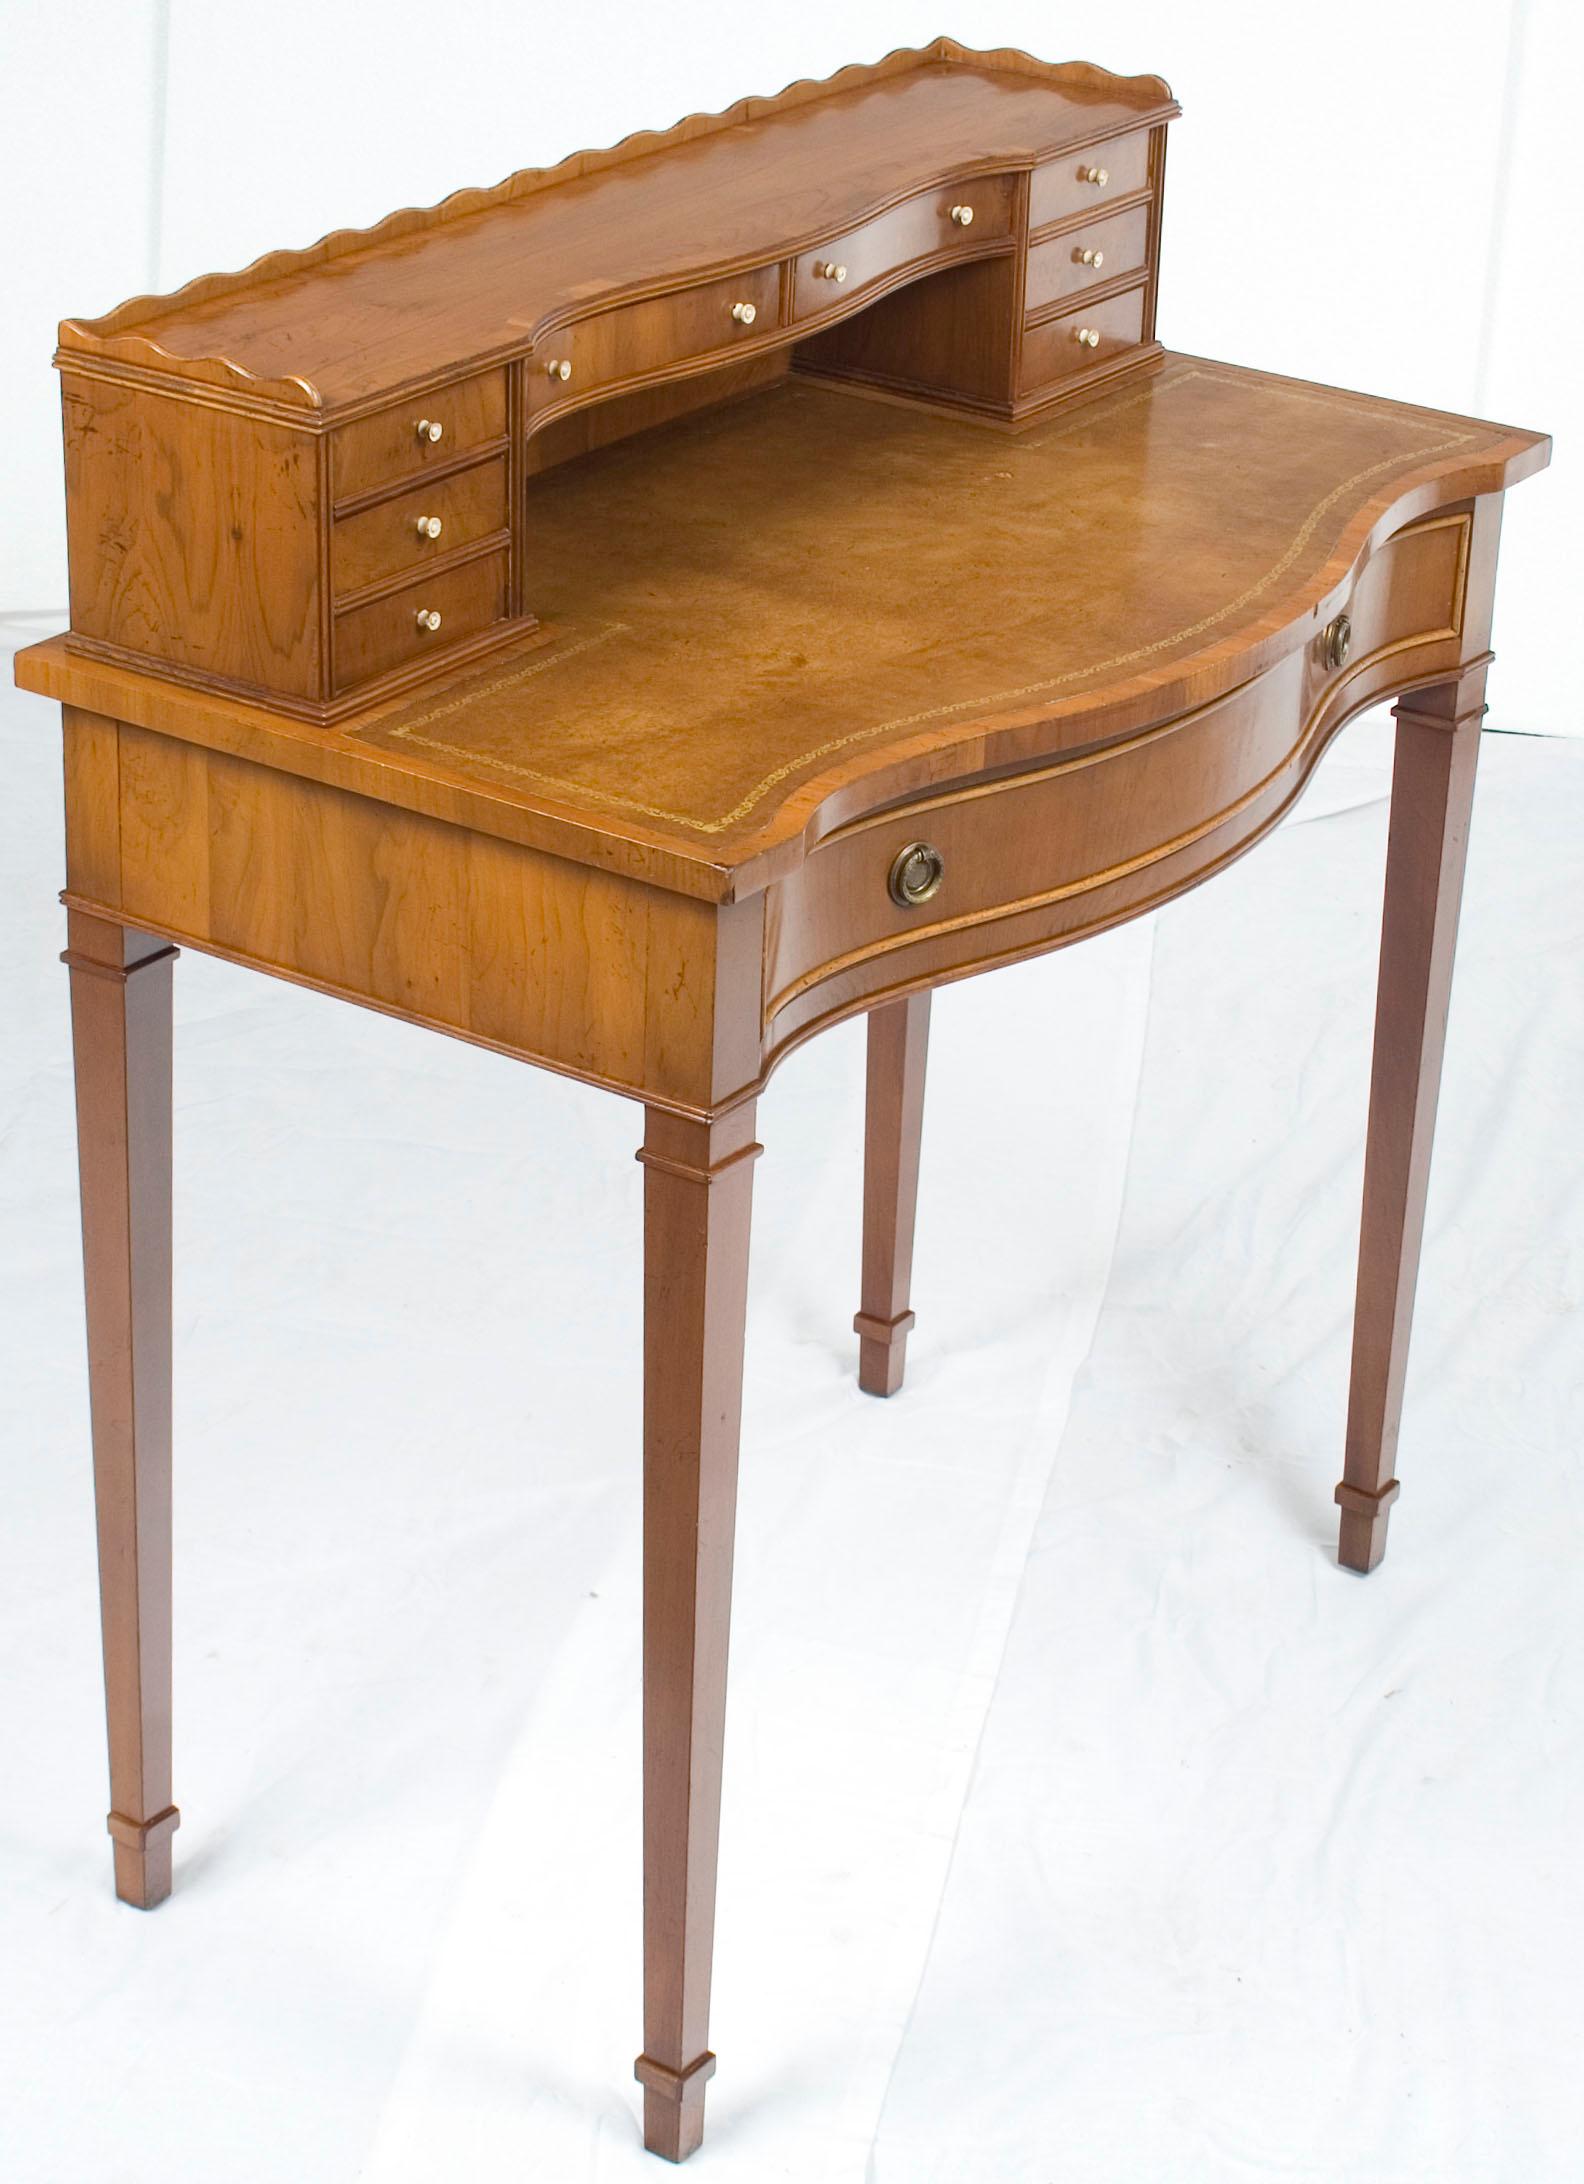 Small Yew Wood Leather Top Regency Style Writing Table Desk with Drawers 2